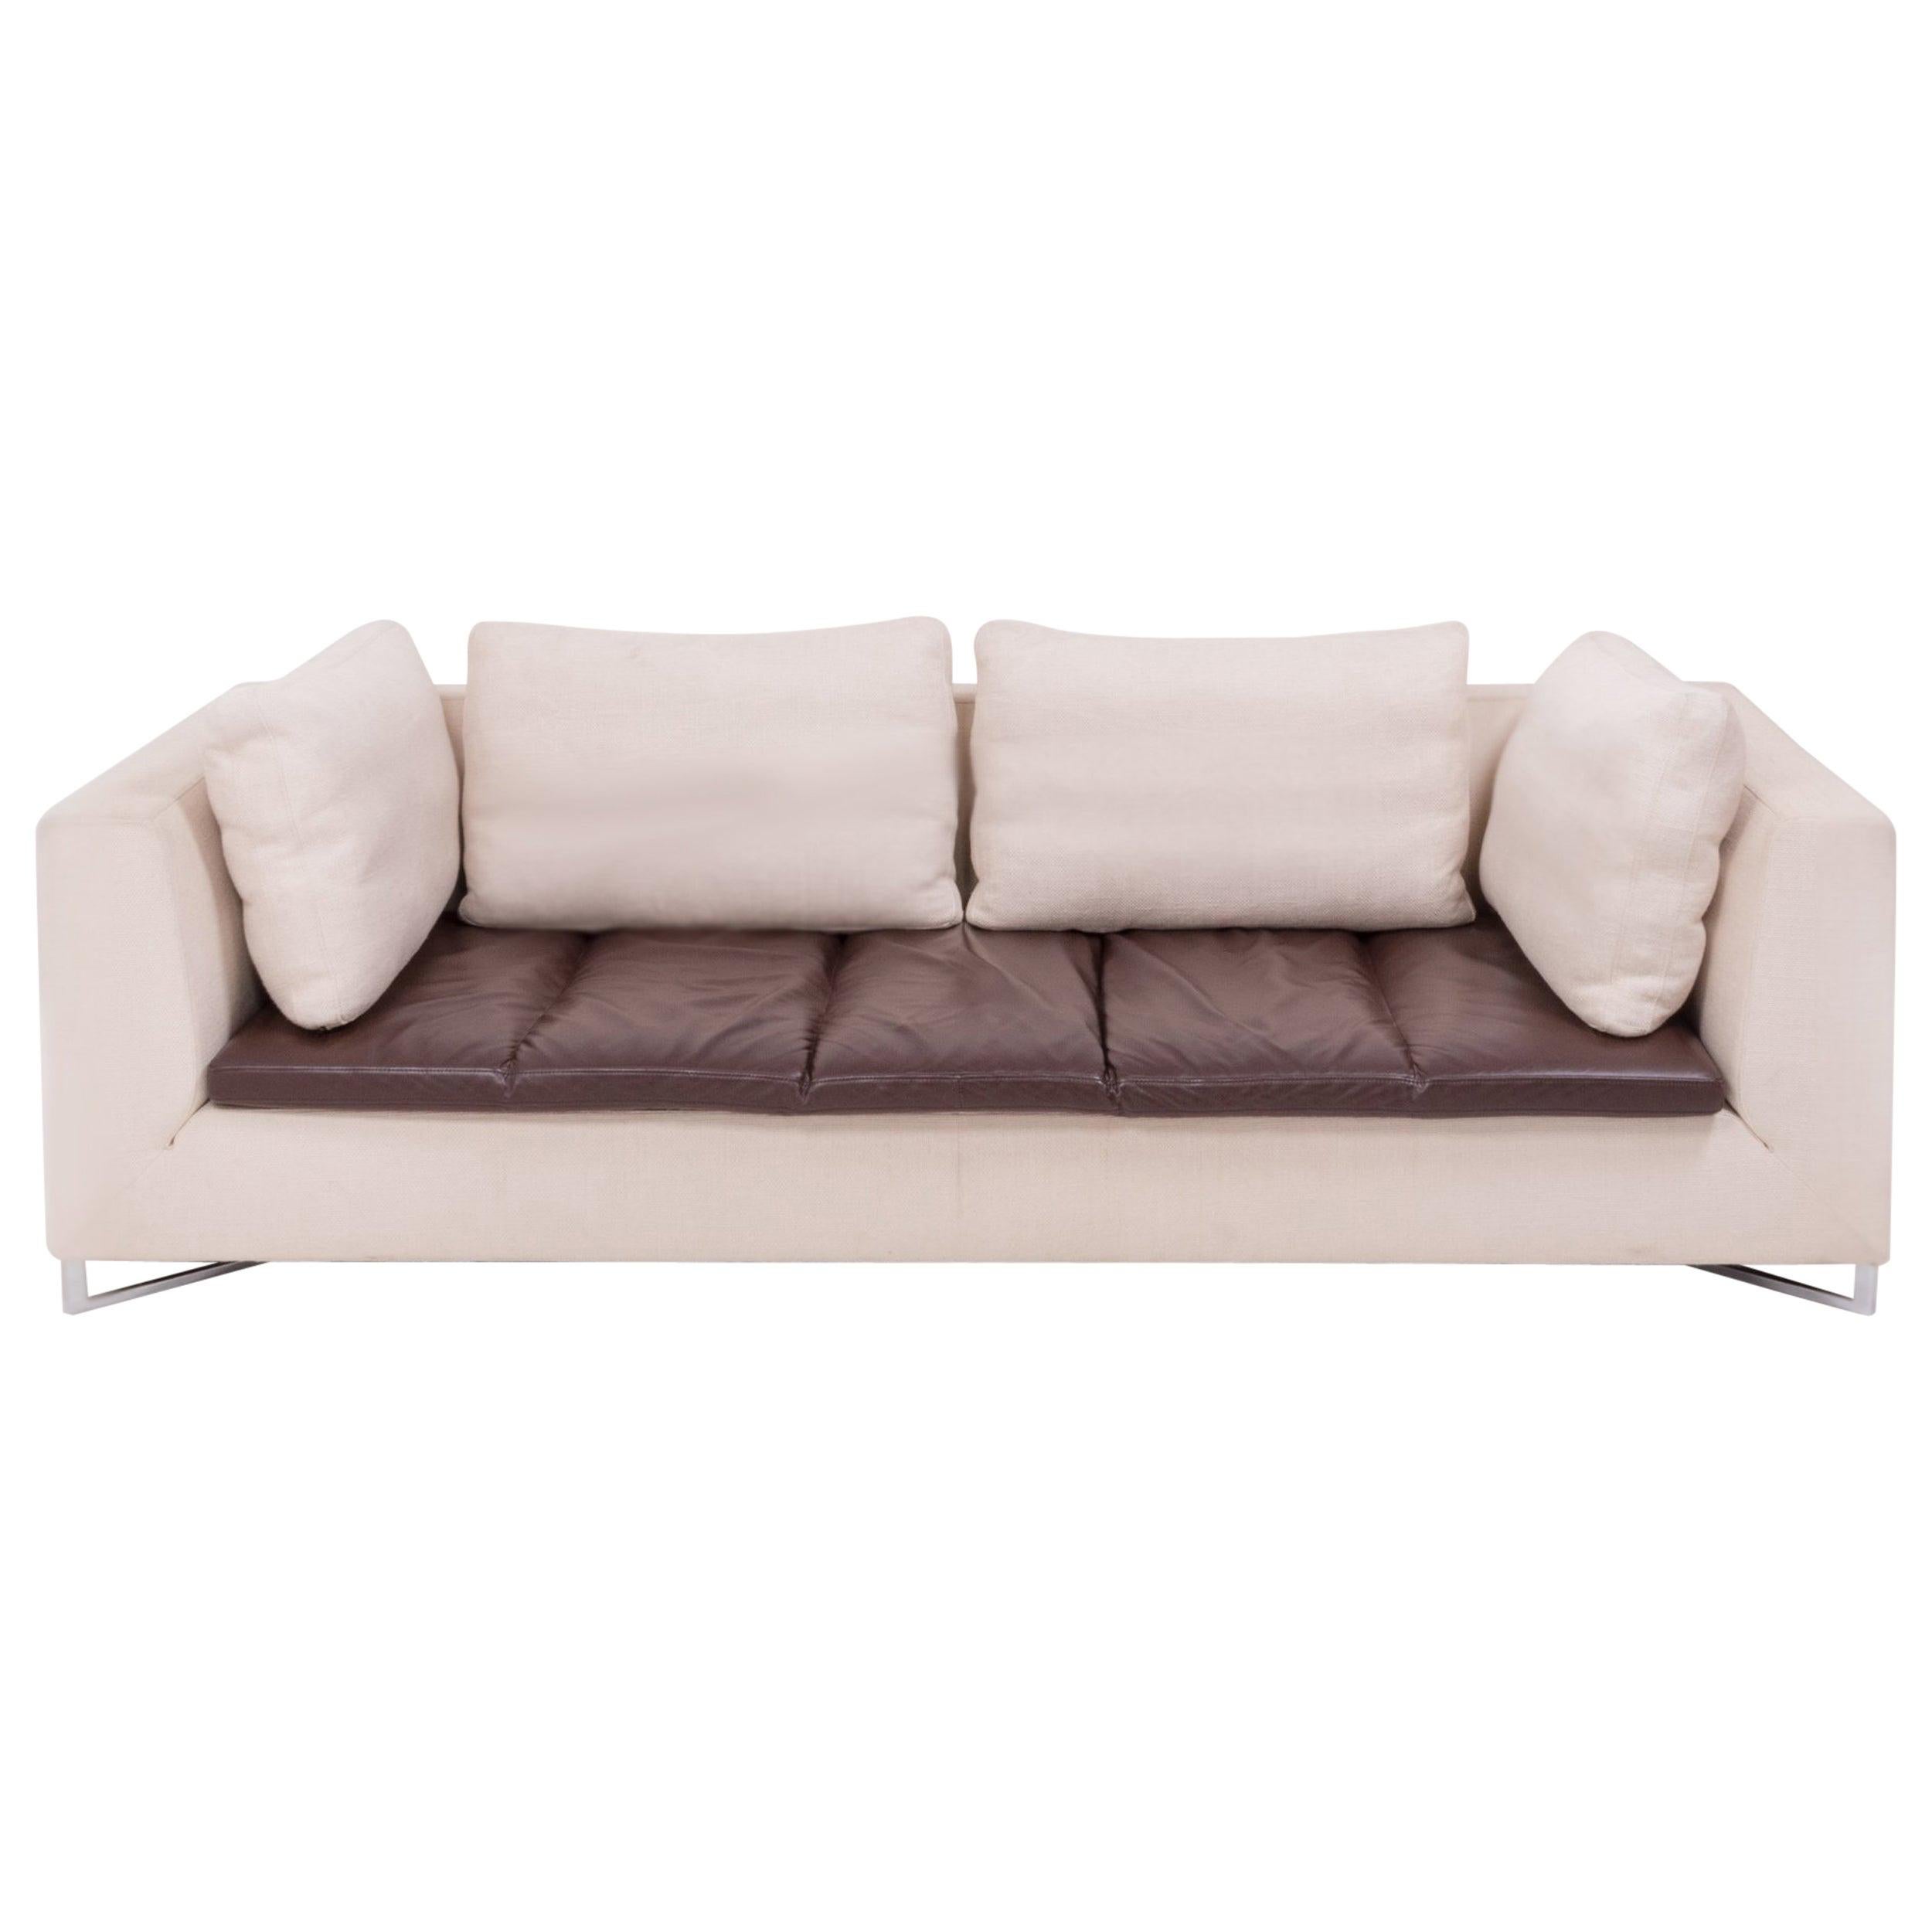 Feng Ivory and Brown Three-Seat Sofa by Didier Gomez for Ligne Roset